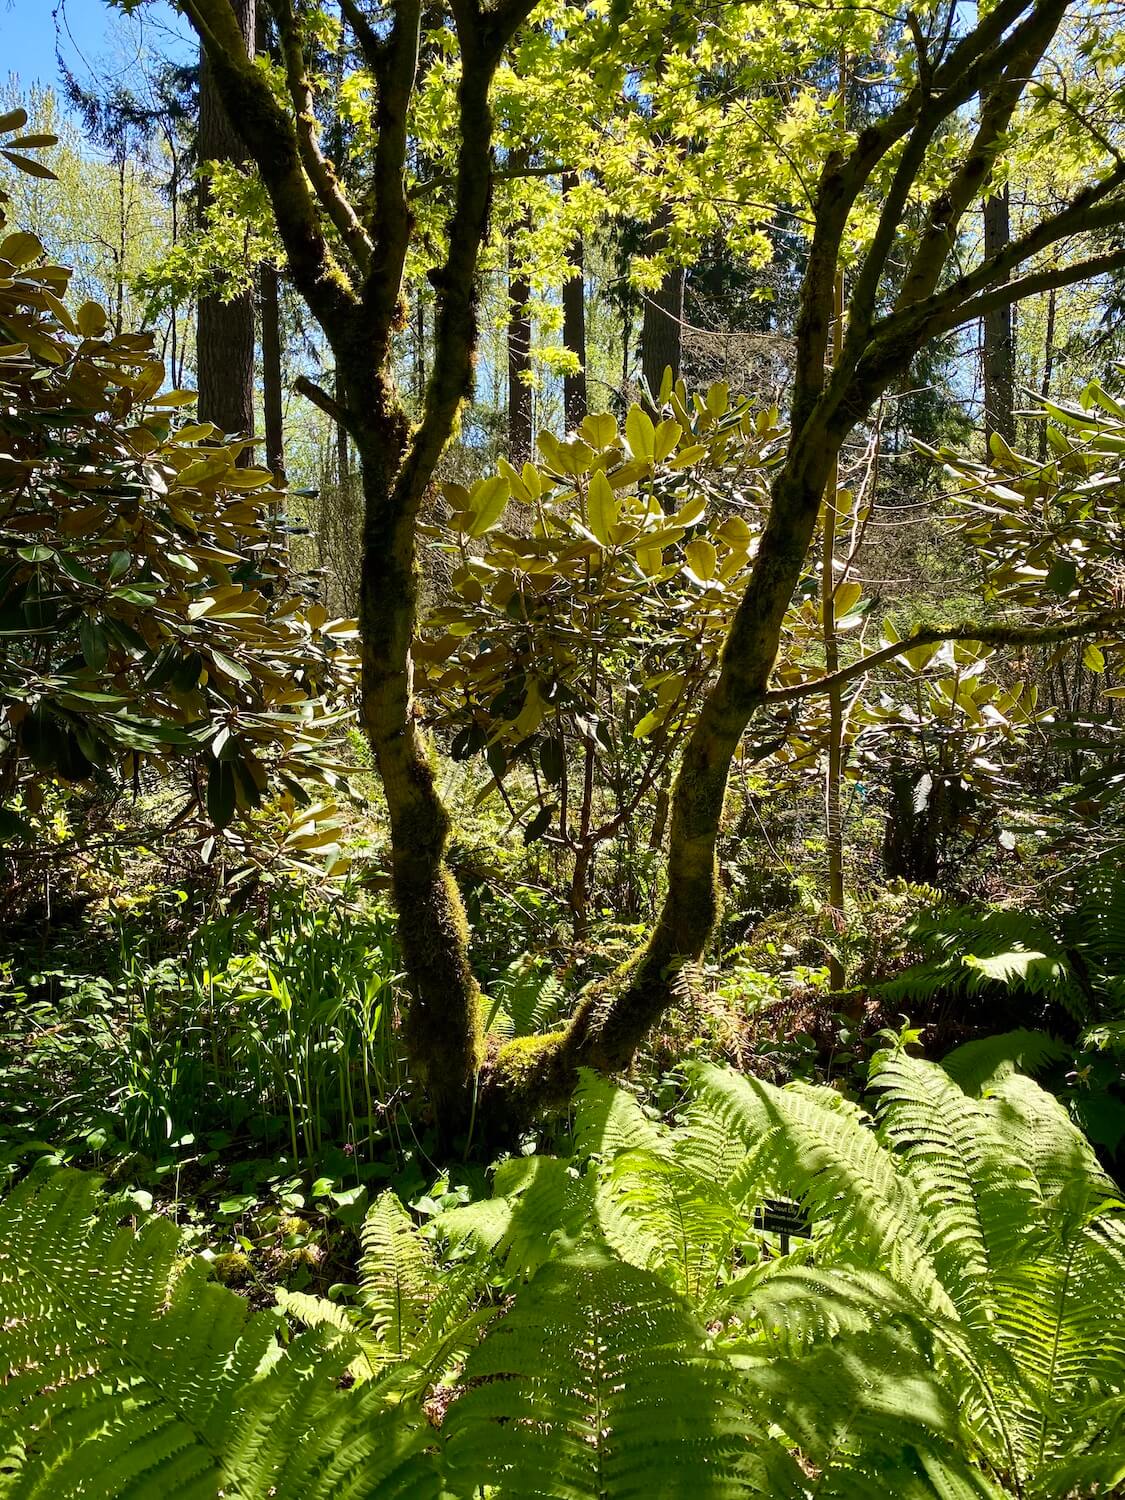 The forest scene in the rhododendron  Species Botanical Garden near Seattle, Washington features many varieties of trees, including fir and the maple shown in this photo.  